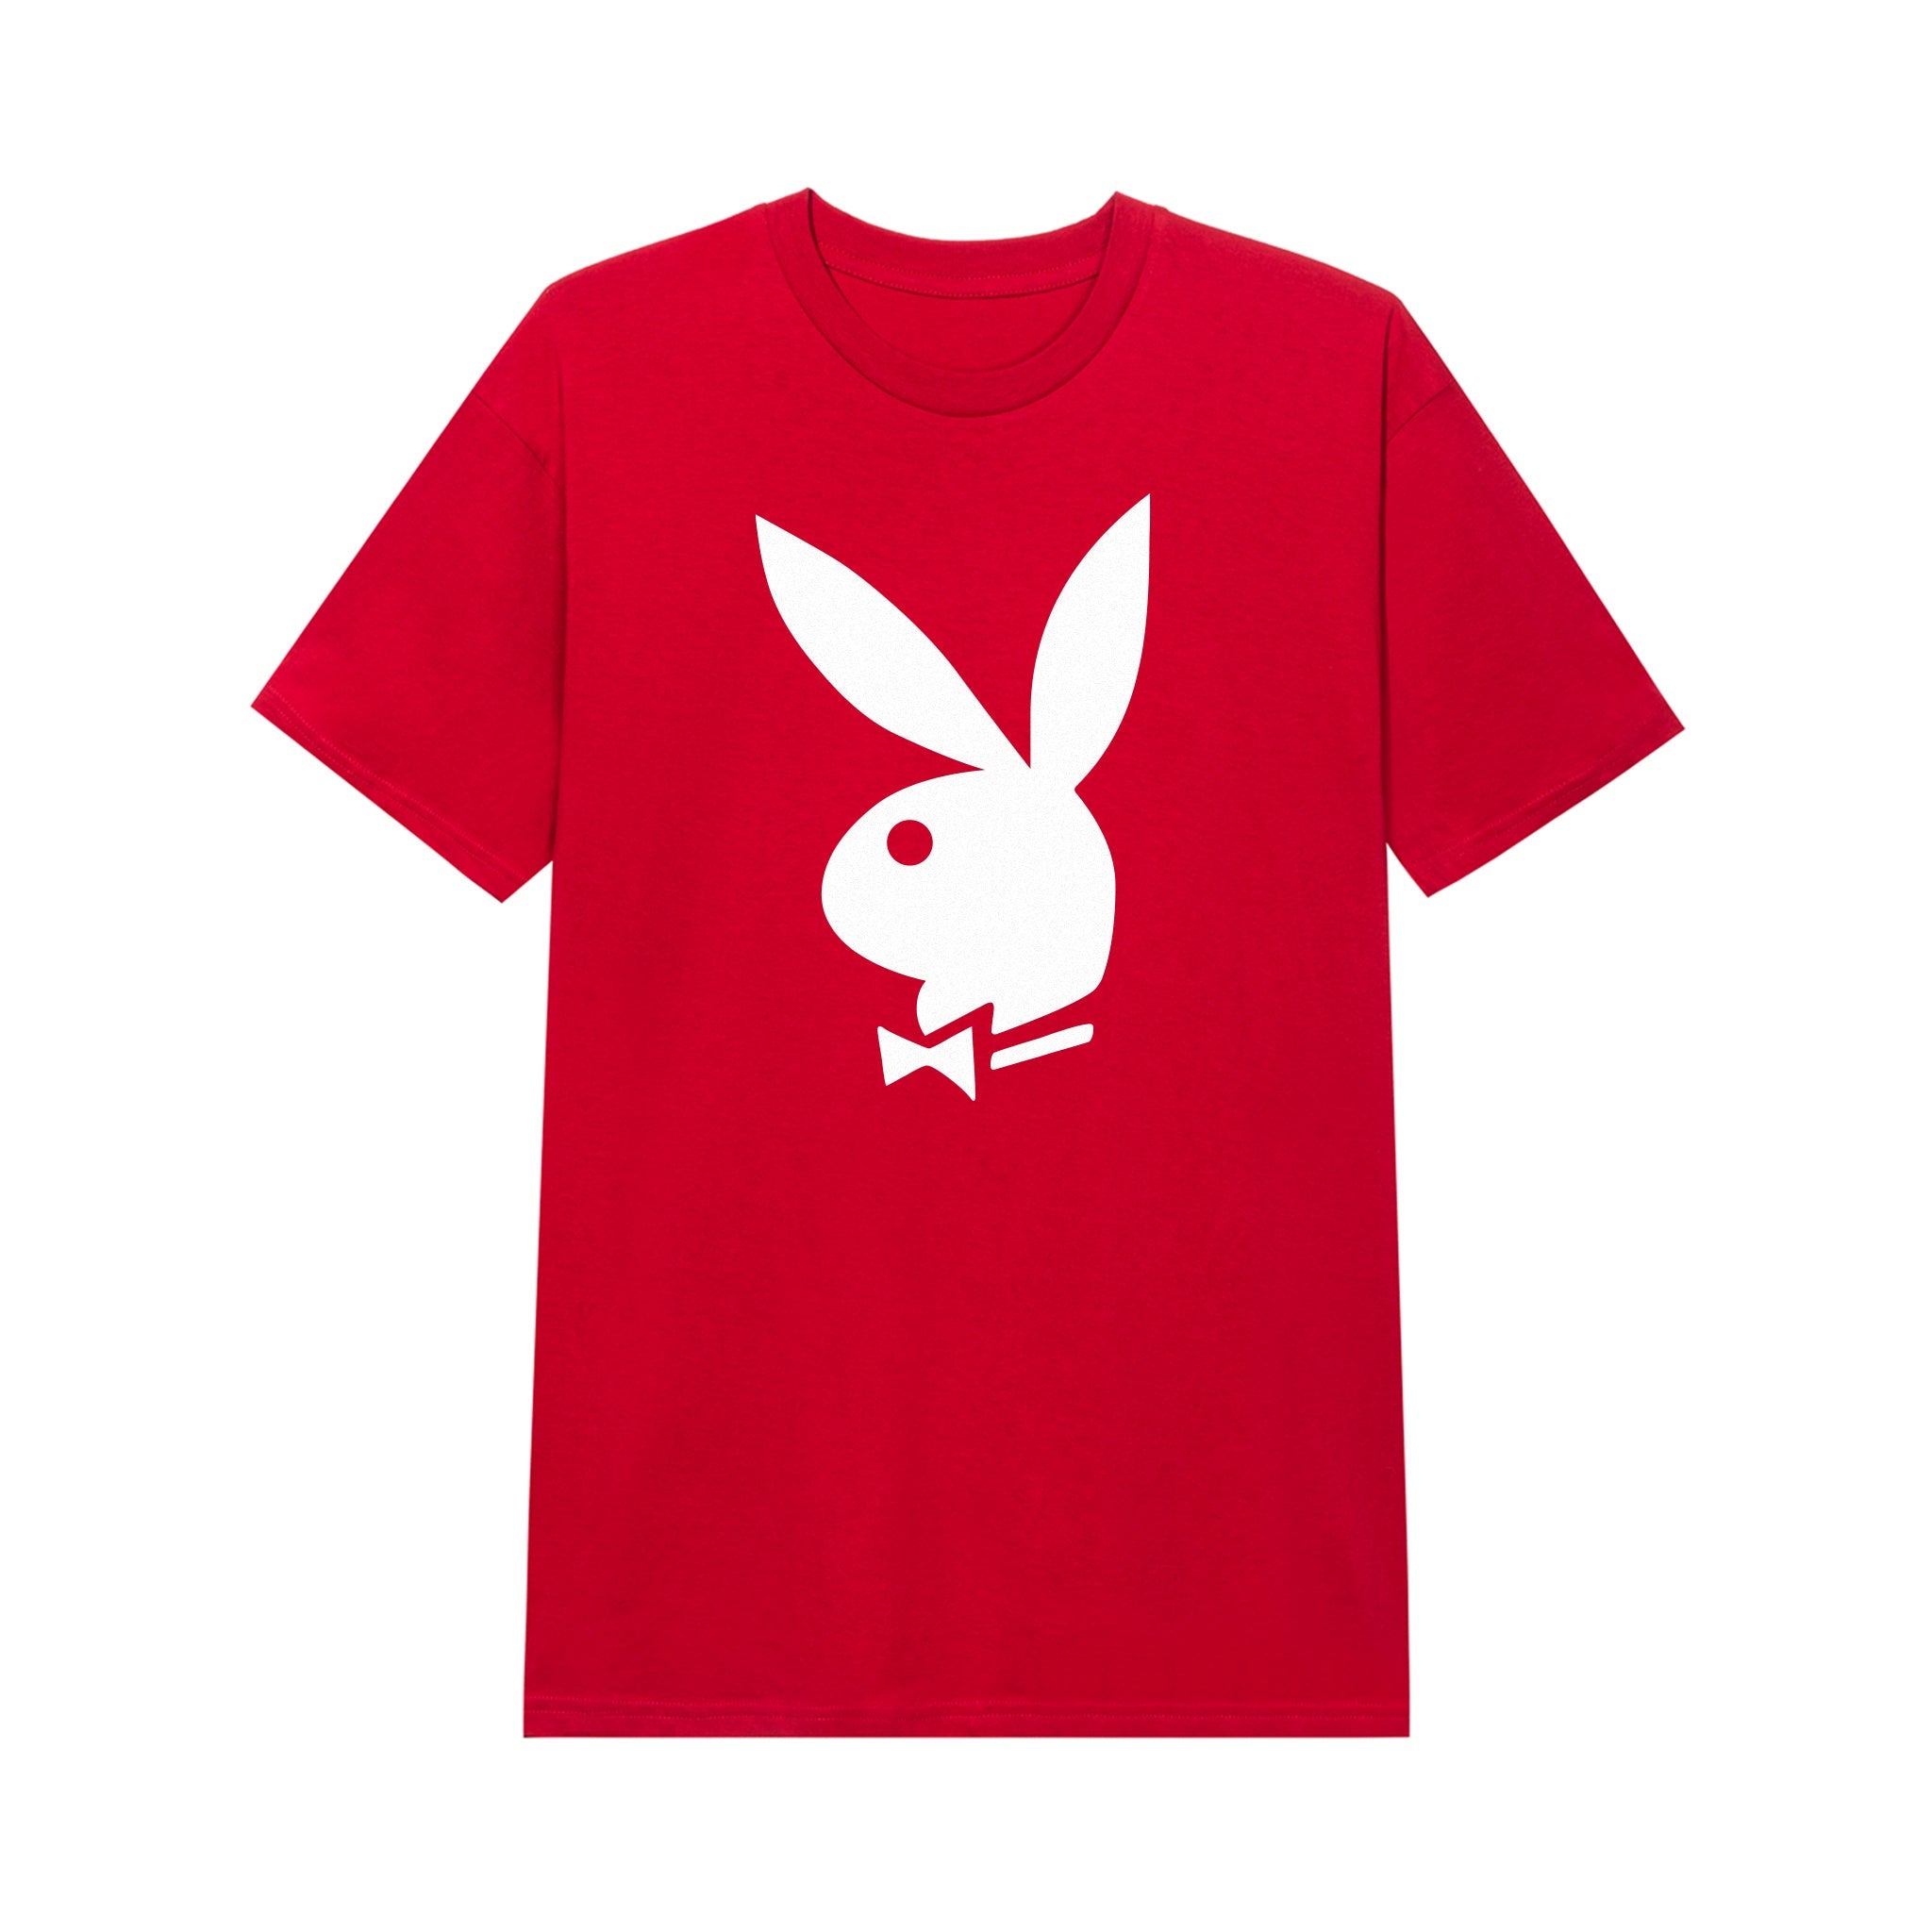 Buy Psycho Bunny Keswick Graphic Tee Shirt at In Style – InStyle